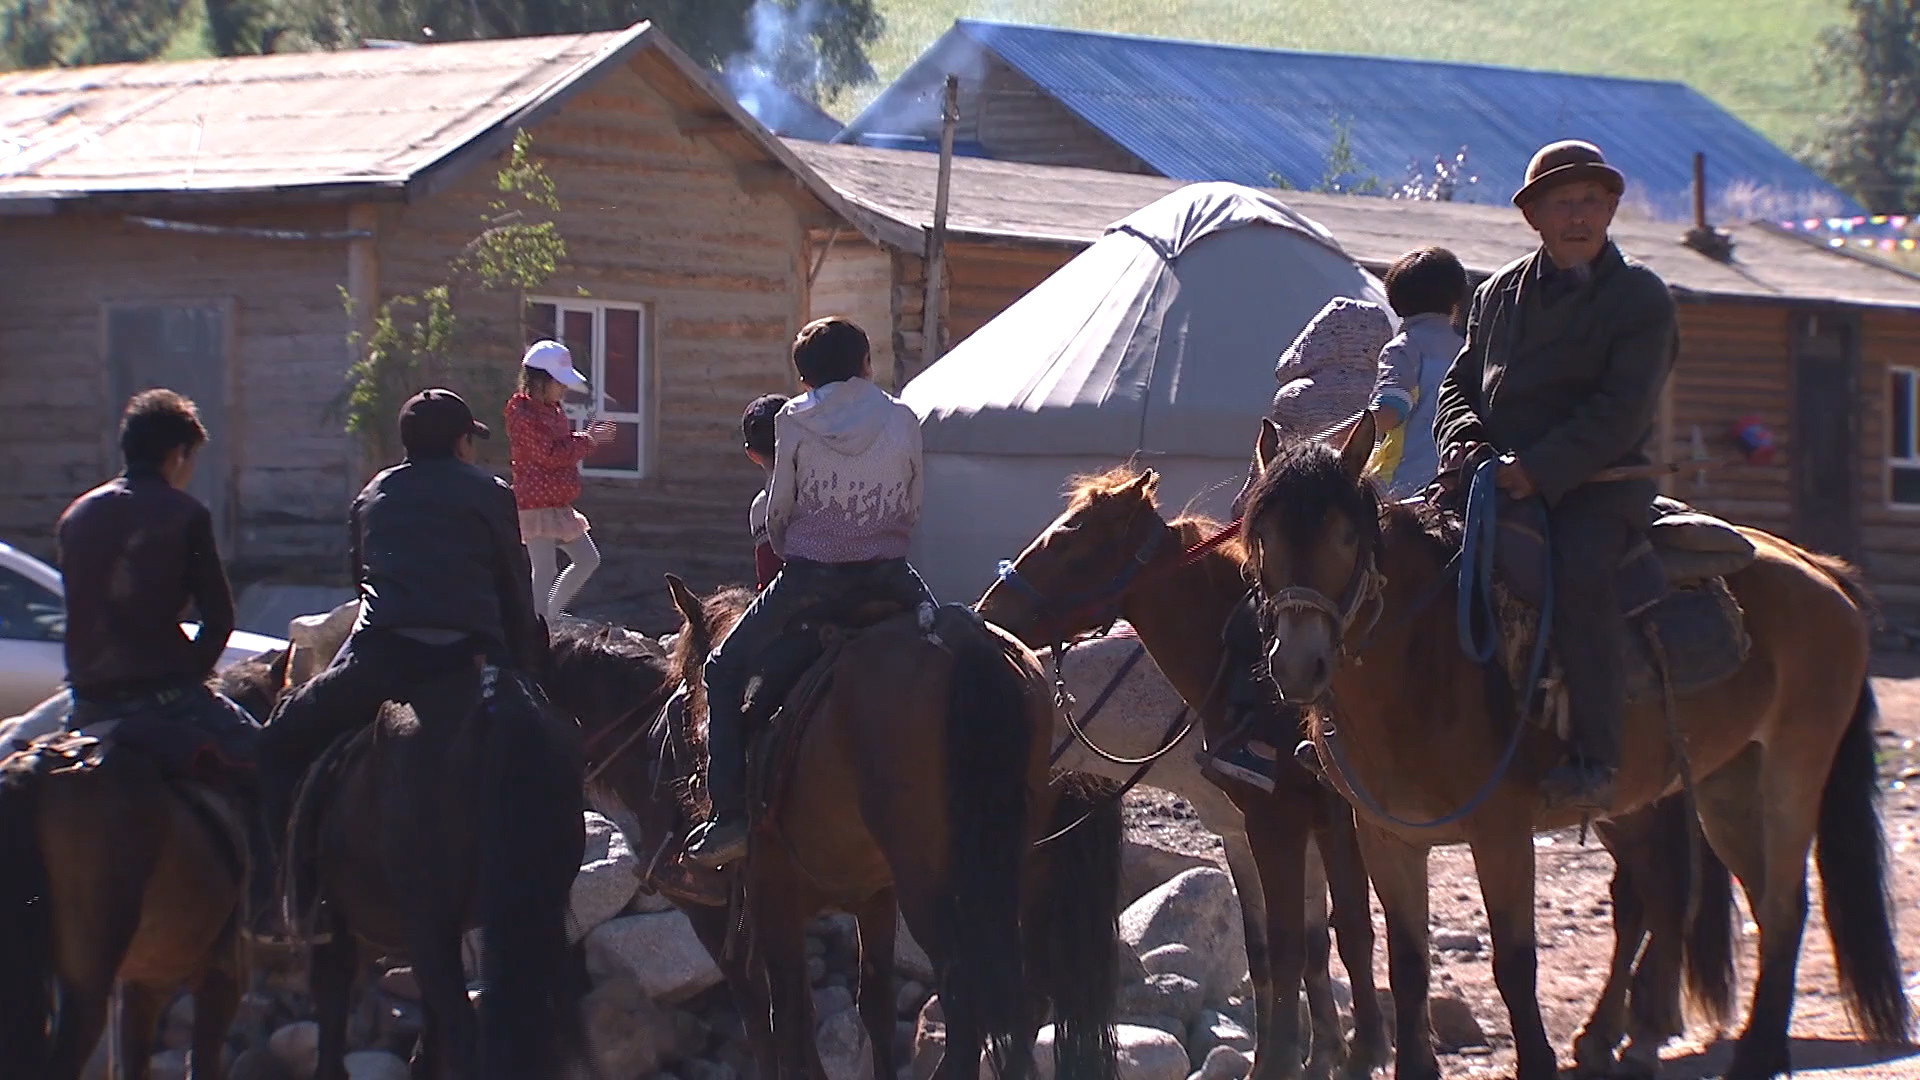 A group of tourists preparing to travel through the hills that once belonged to the nomads.